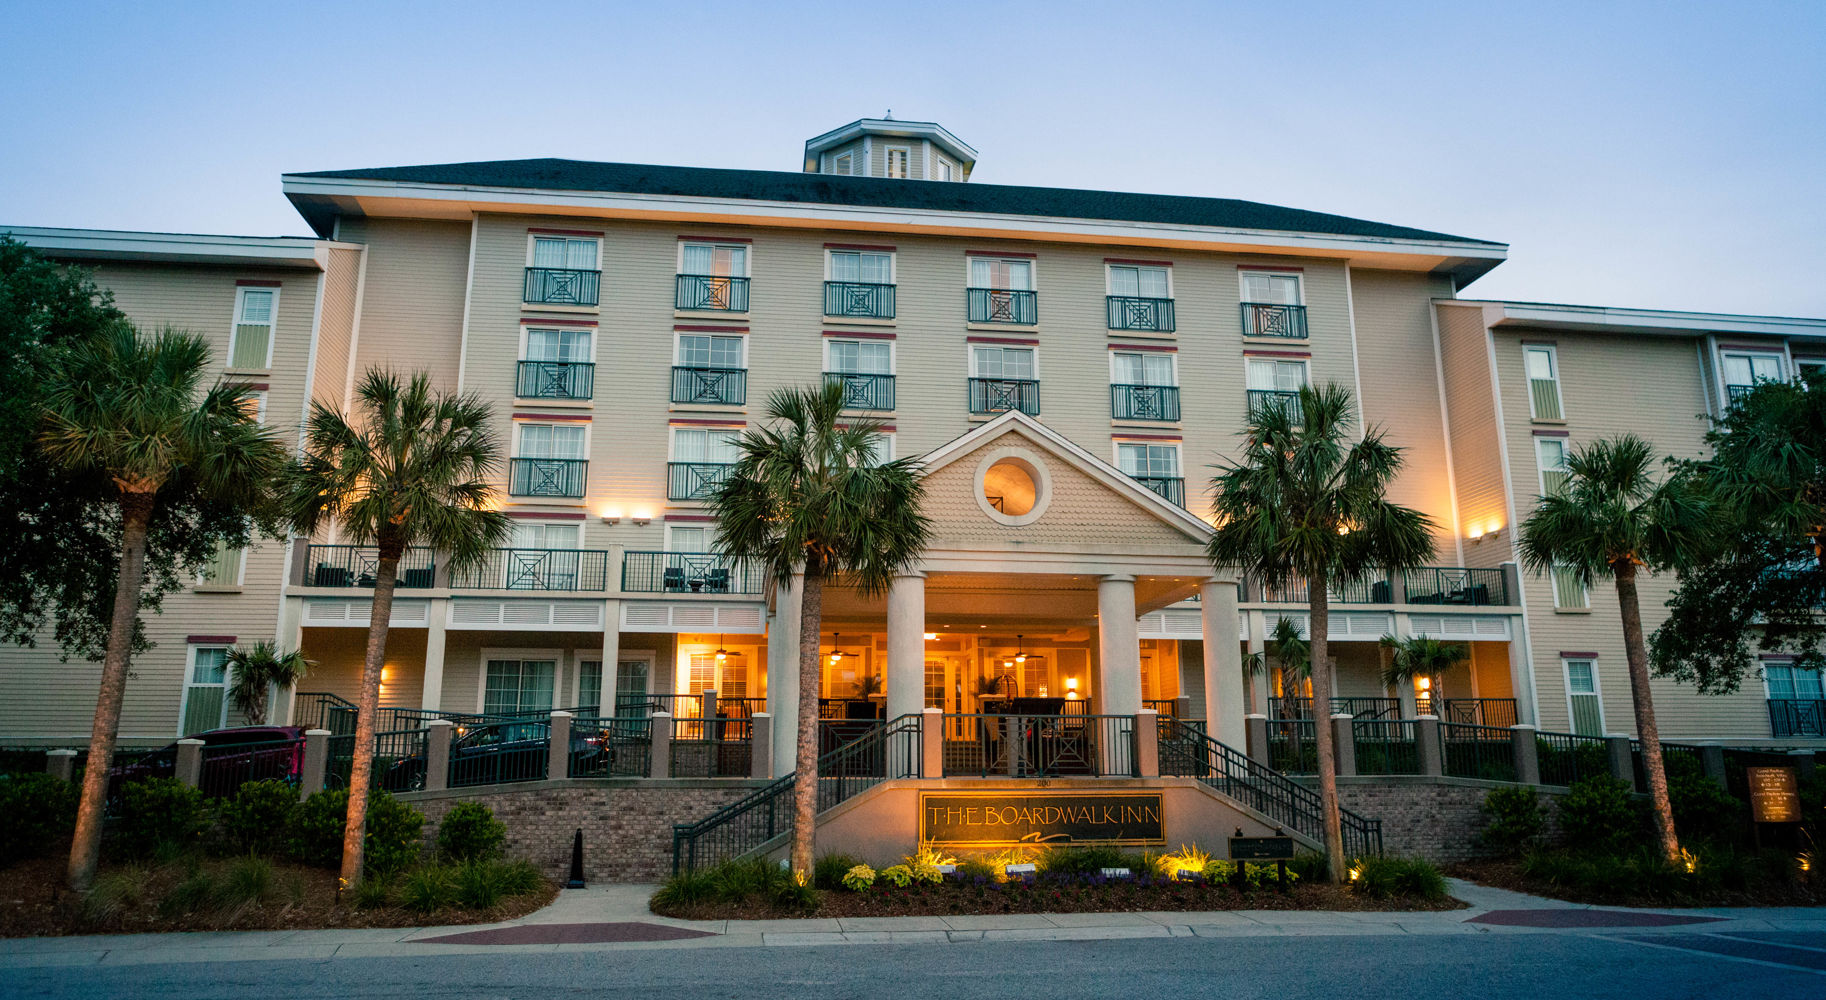 The Wild Dunes Resort a 1600-acre oceanfront resort on South Carolinas Isle of Palms began development on a new 153-roo